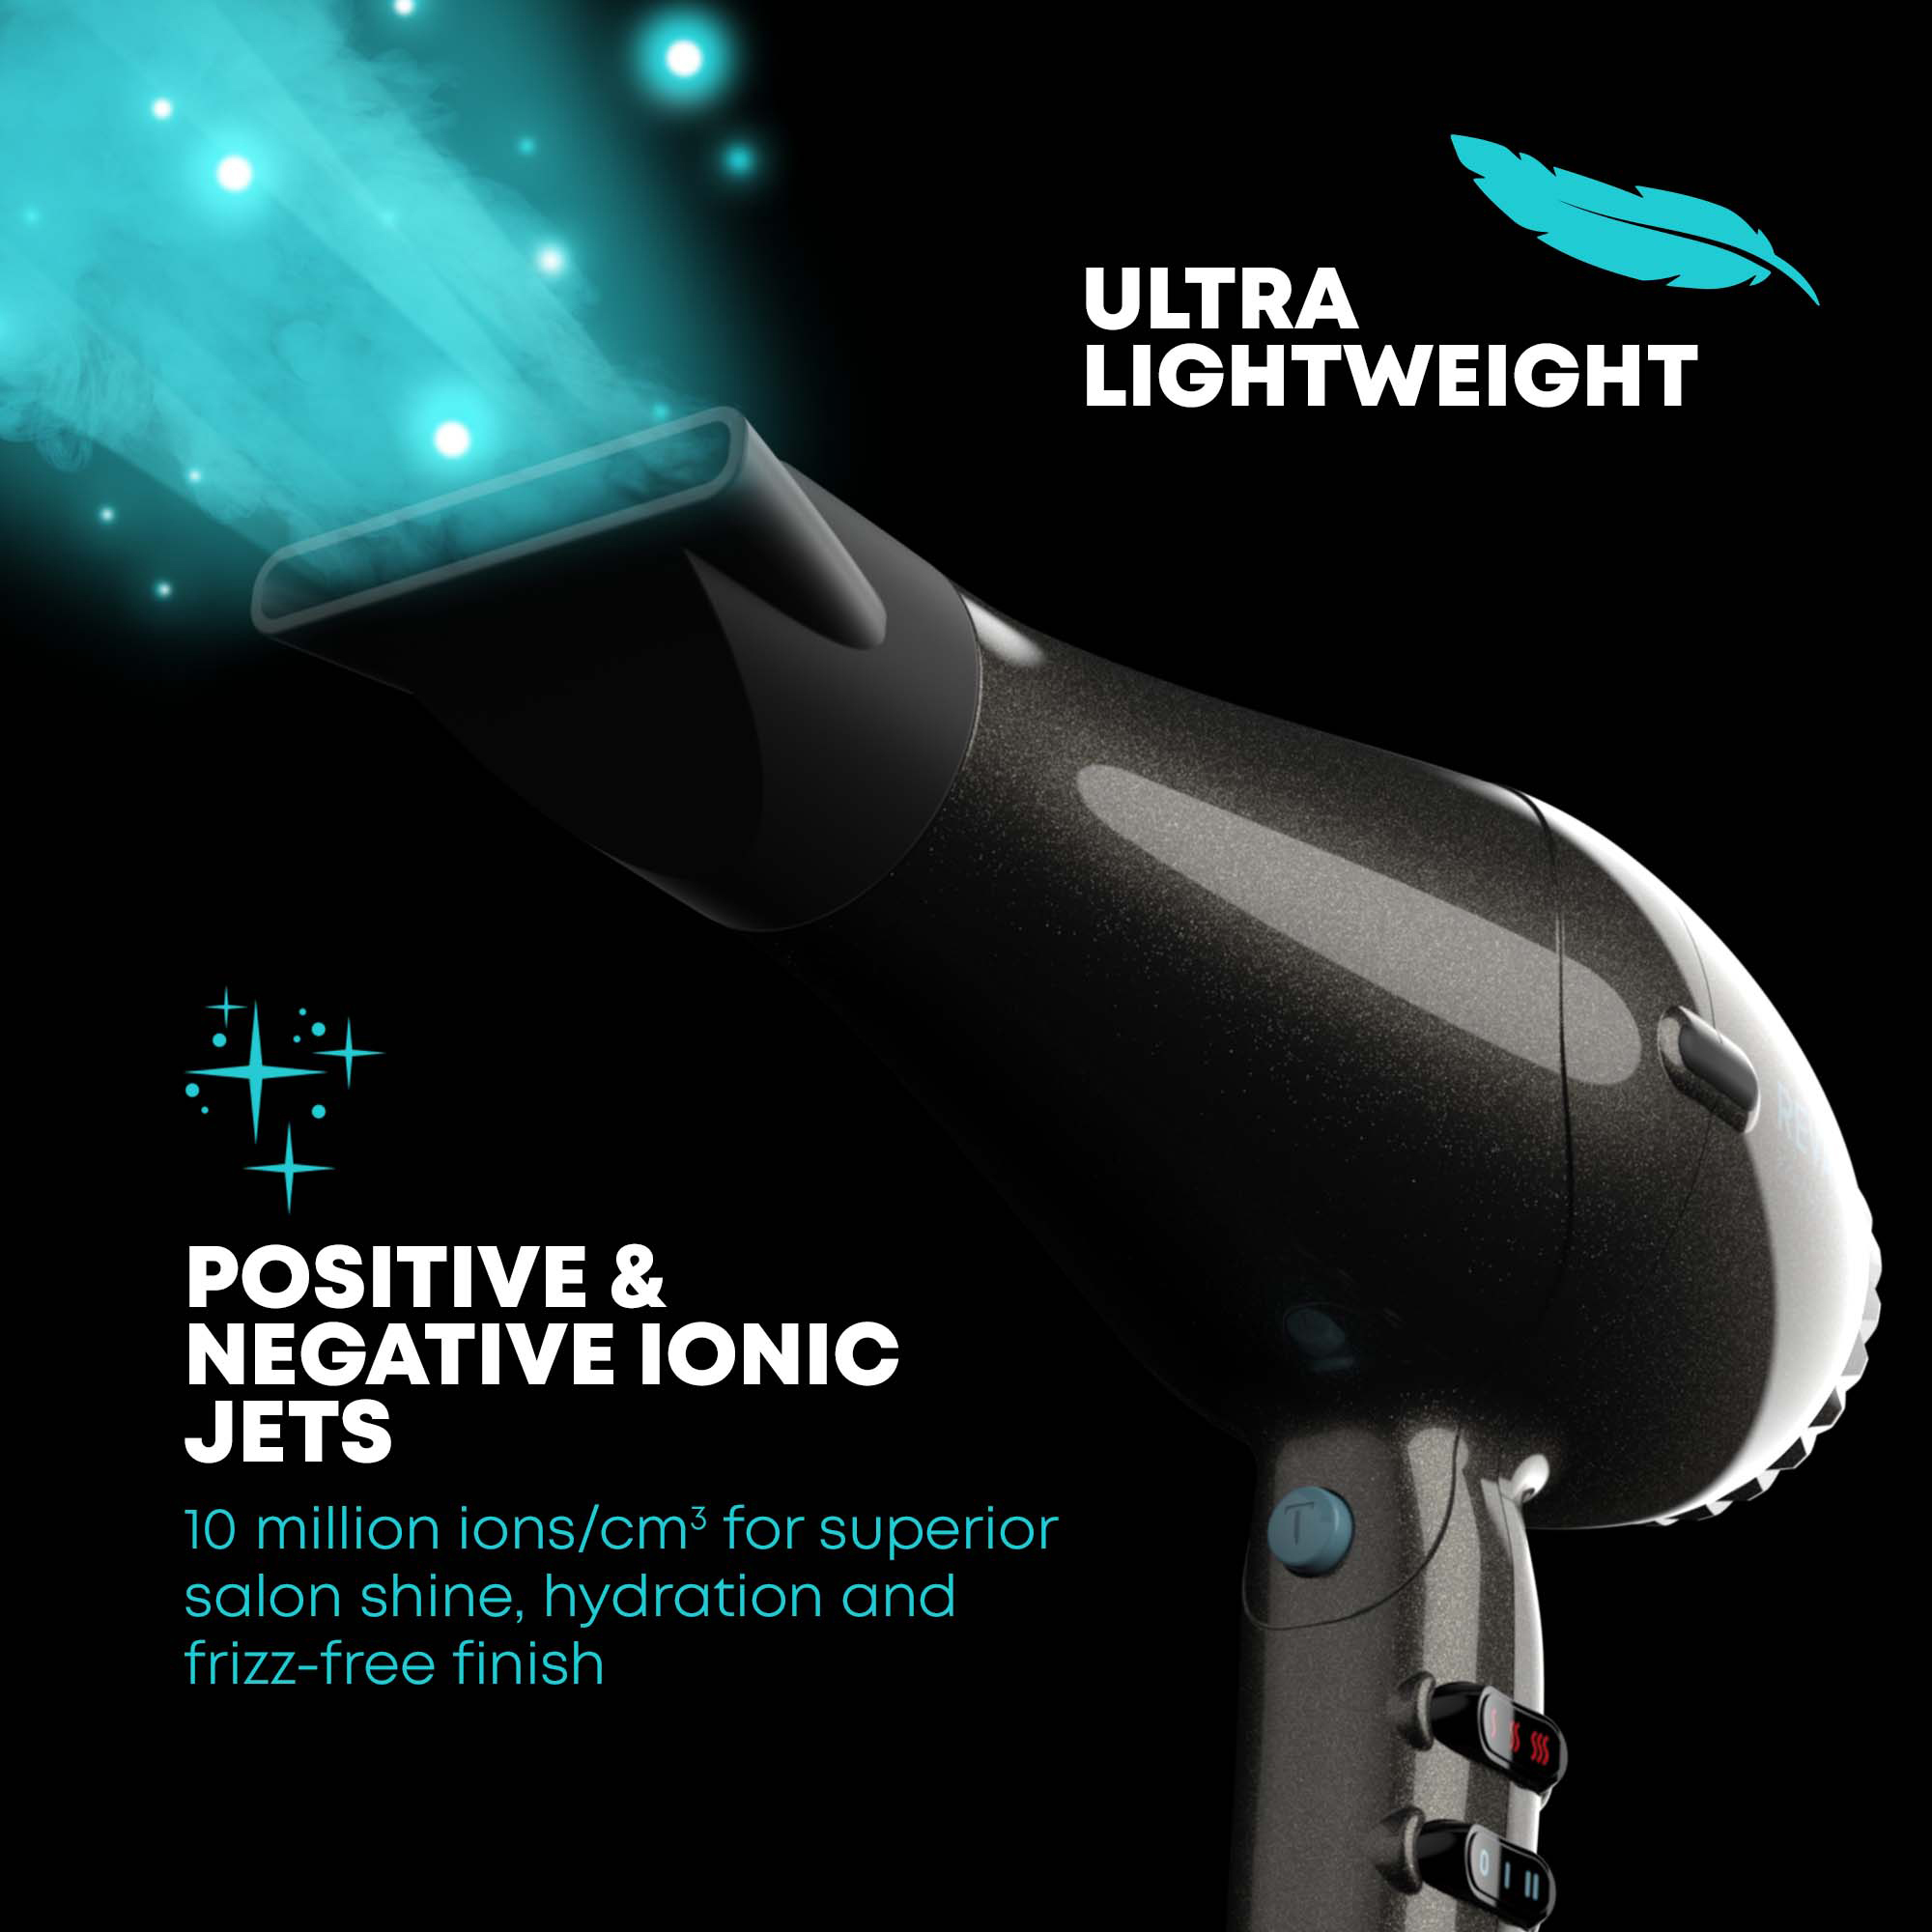 Positive and negative ionic jets